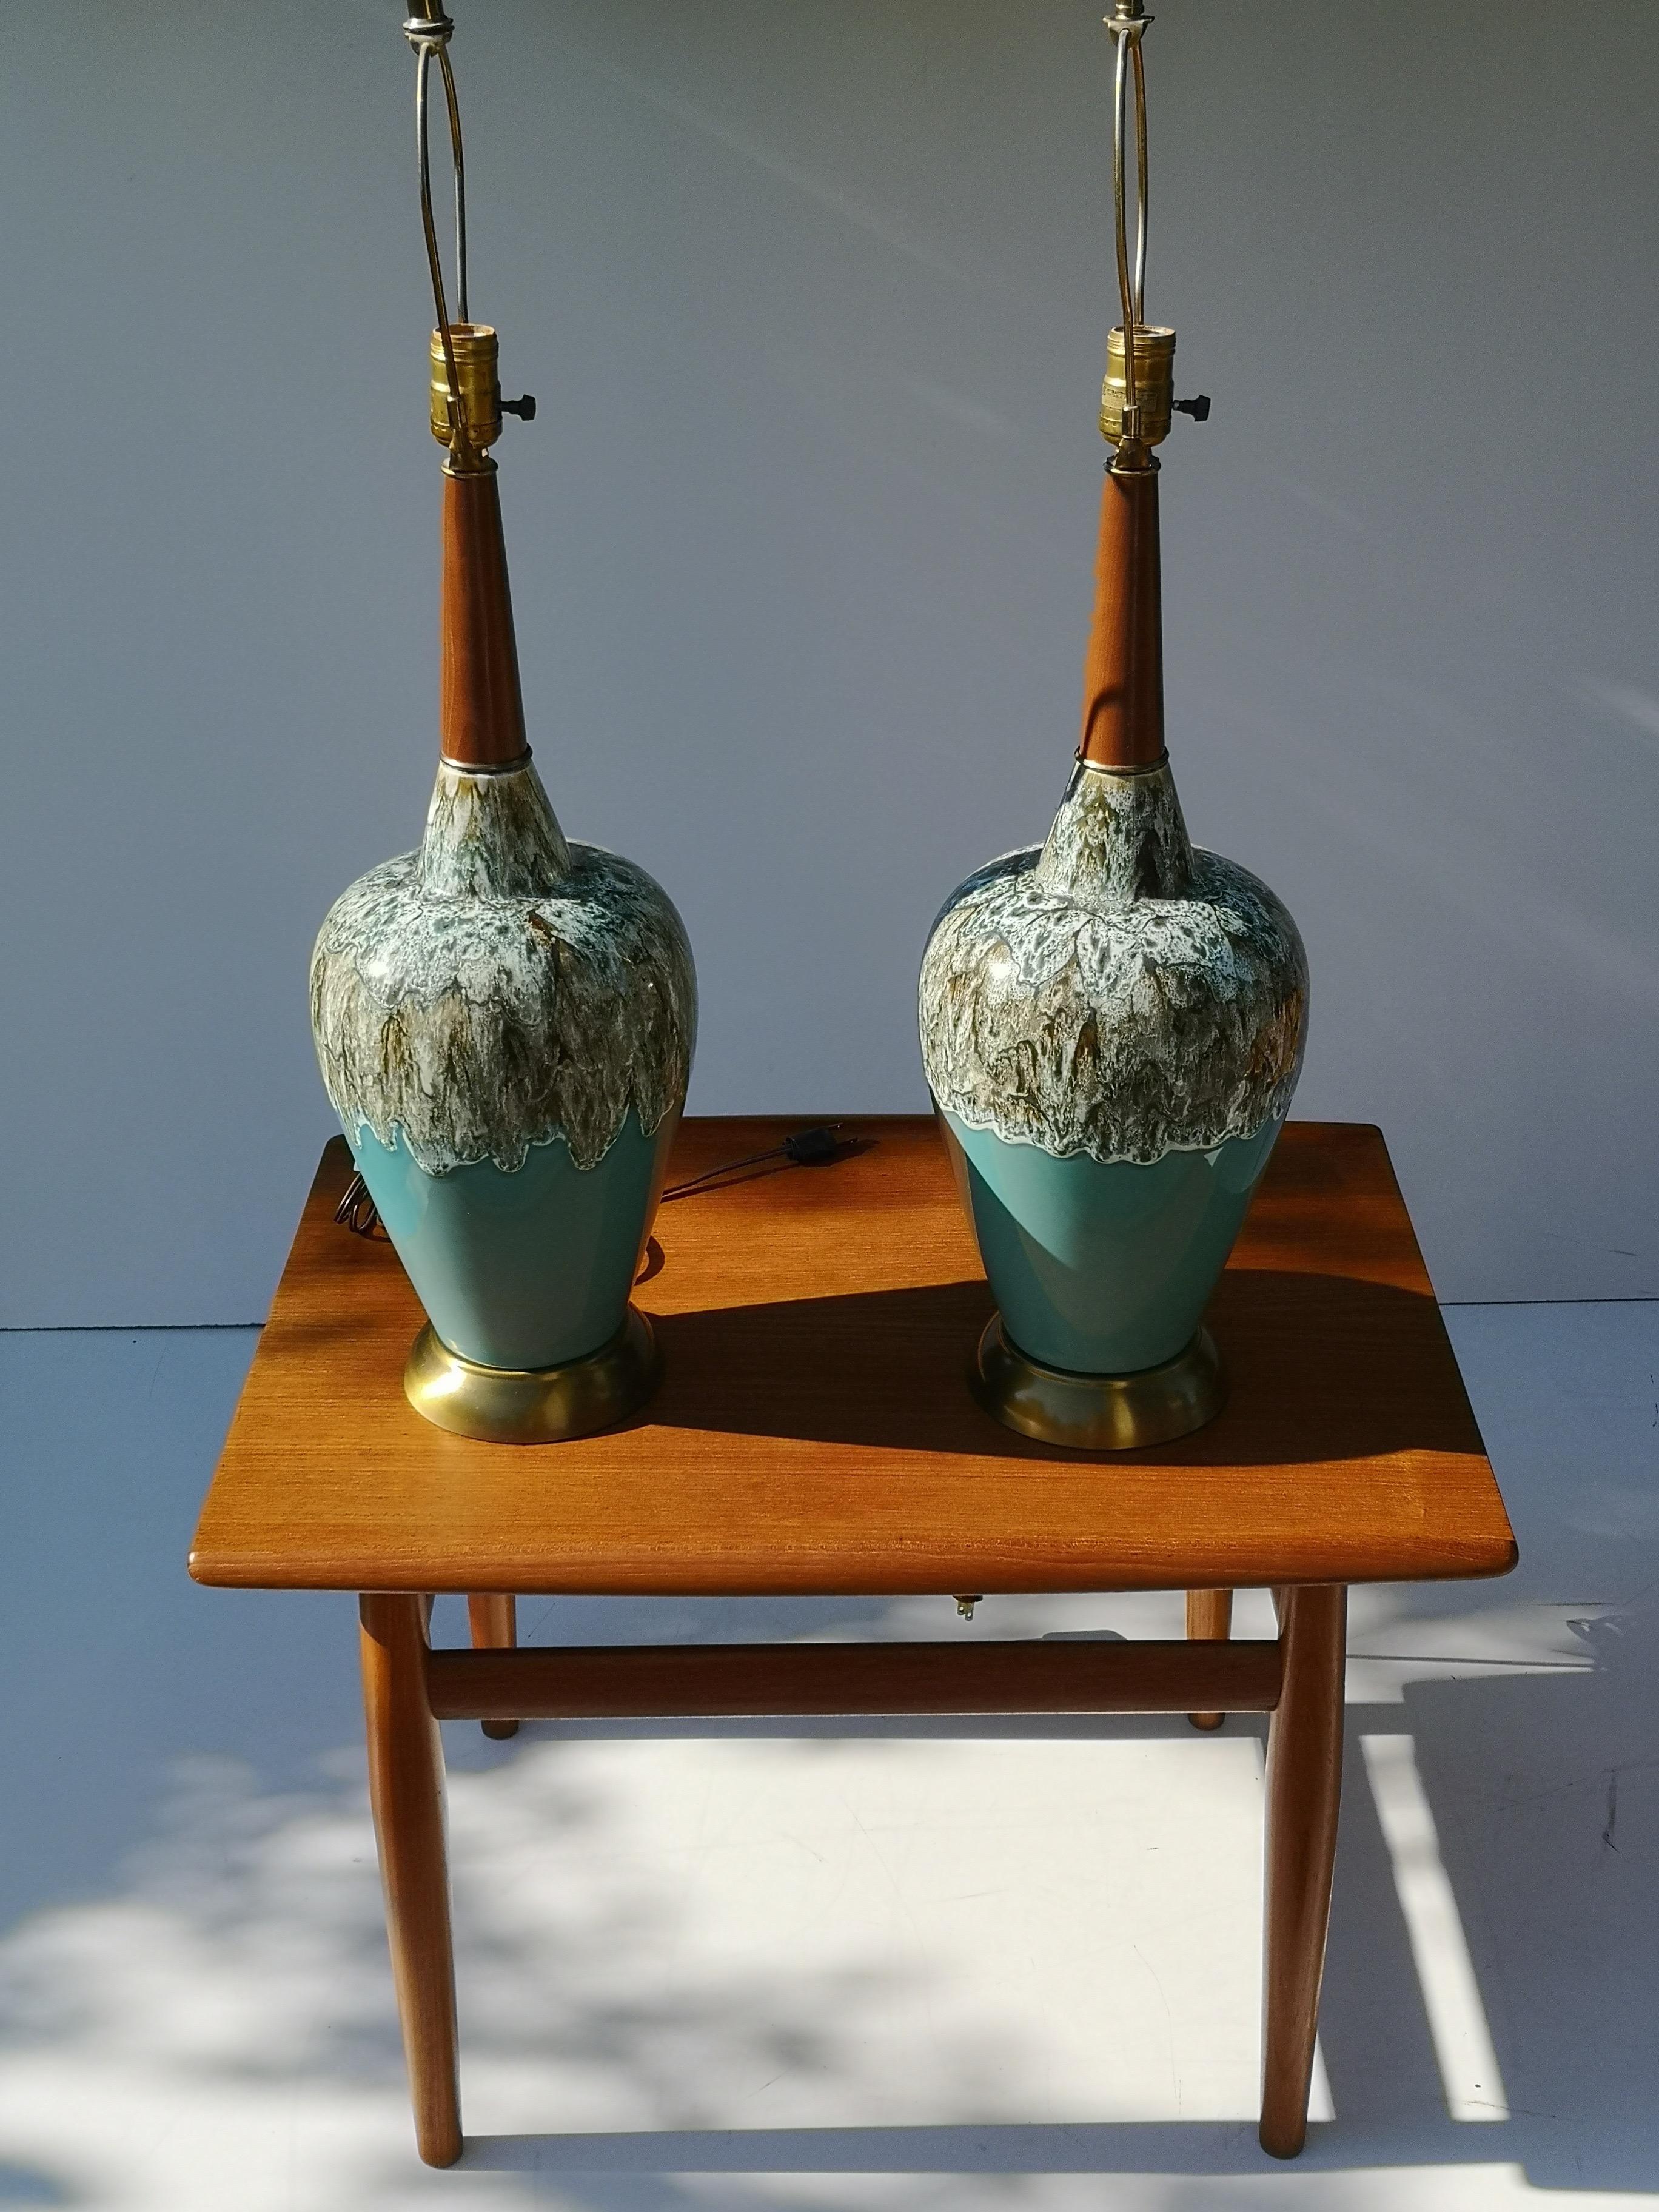 Unique pair of 1960s ceramic drip glazed lamps on brushed metal base, with solid walnut necks. Exceptional condition - includes original shades. 

Measures: Shade diameter 16.25